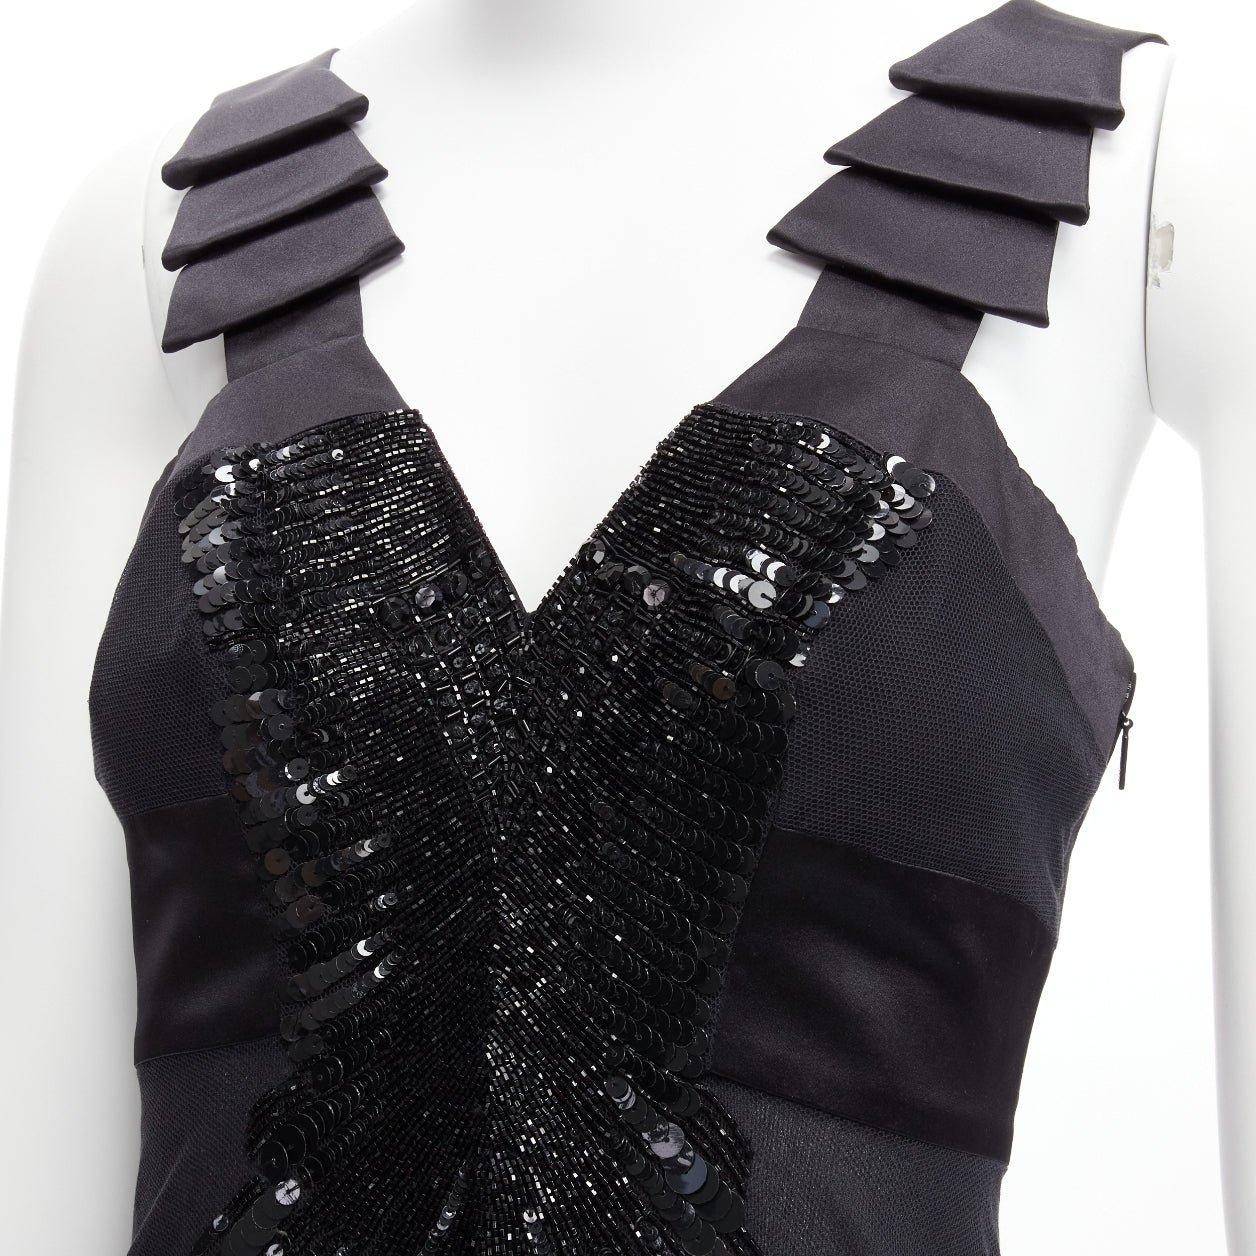 rare VERSACE 2008 black sequins bead embellishment satin ruffle pleated strap dress IT38 XS
Reference: TGAS/D00408
Brand: Versace
Designer: Donatella Versace
Material: Cotton, Silk
Color: Black
Pattern: Solid
Closure: Zip
Extra Details: Side zip